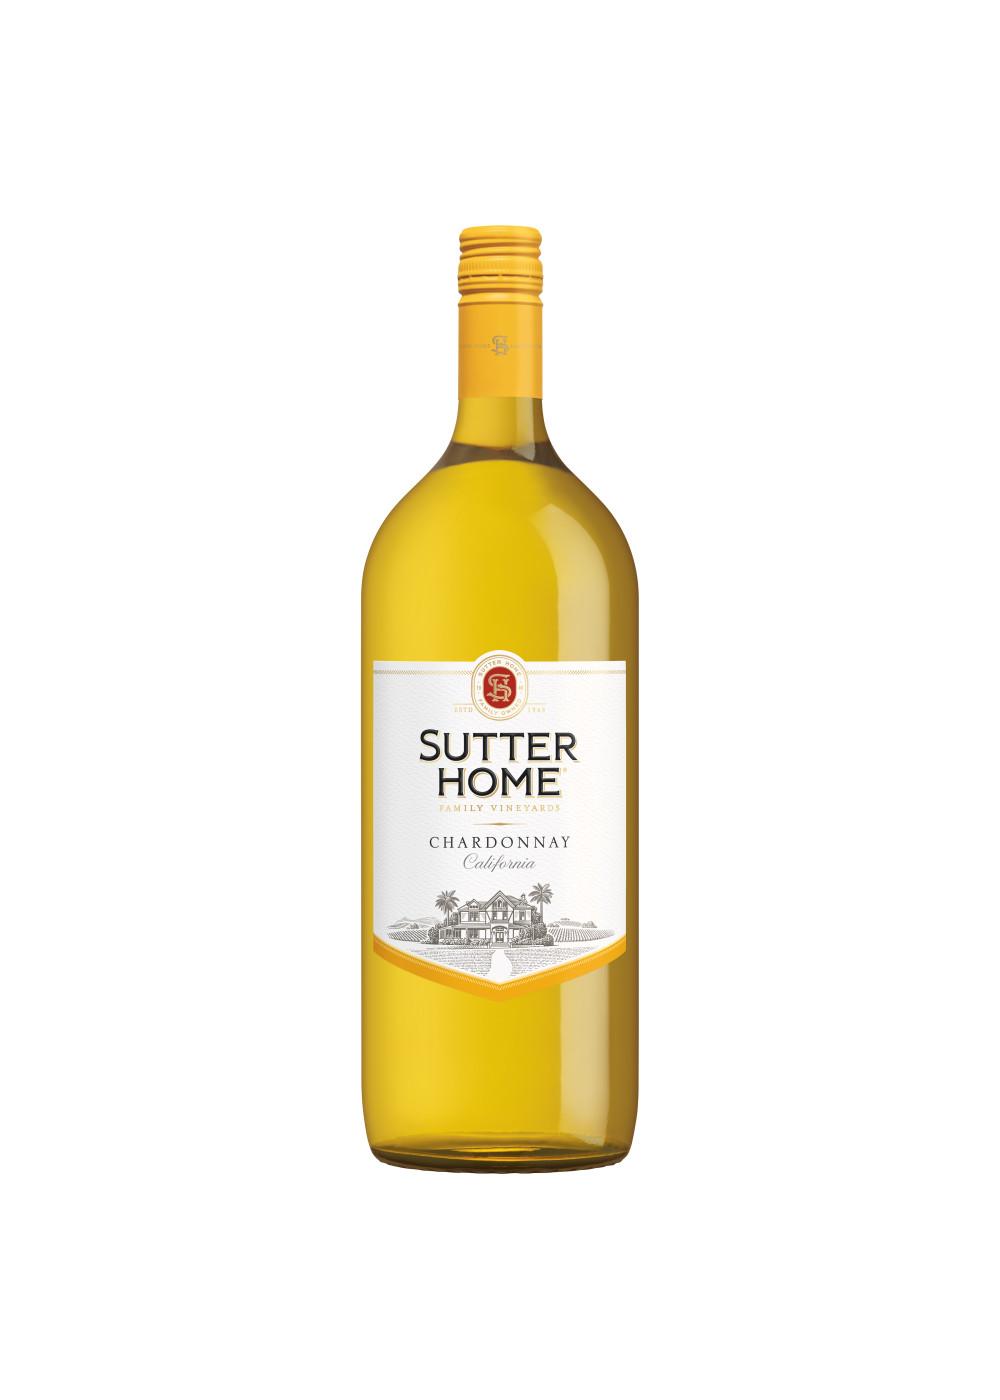 Sutter Home Family Vineyards Chardonnay Wine; image 1 of 4